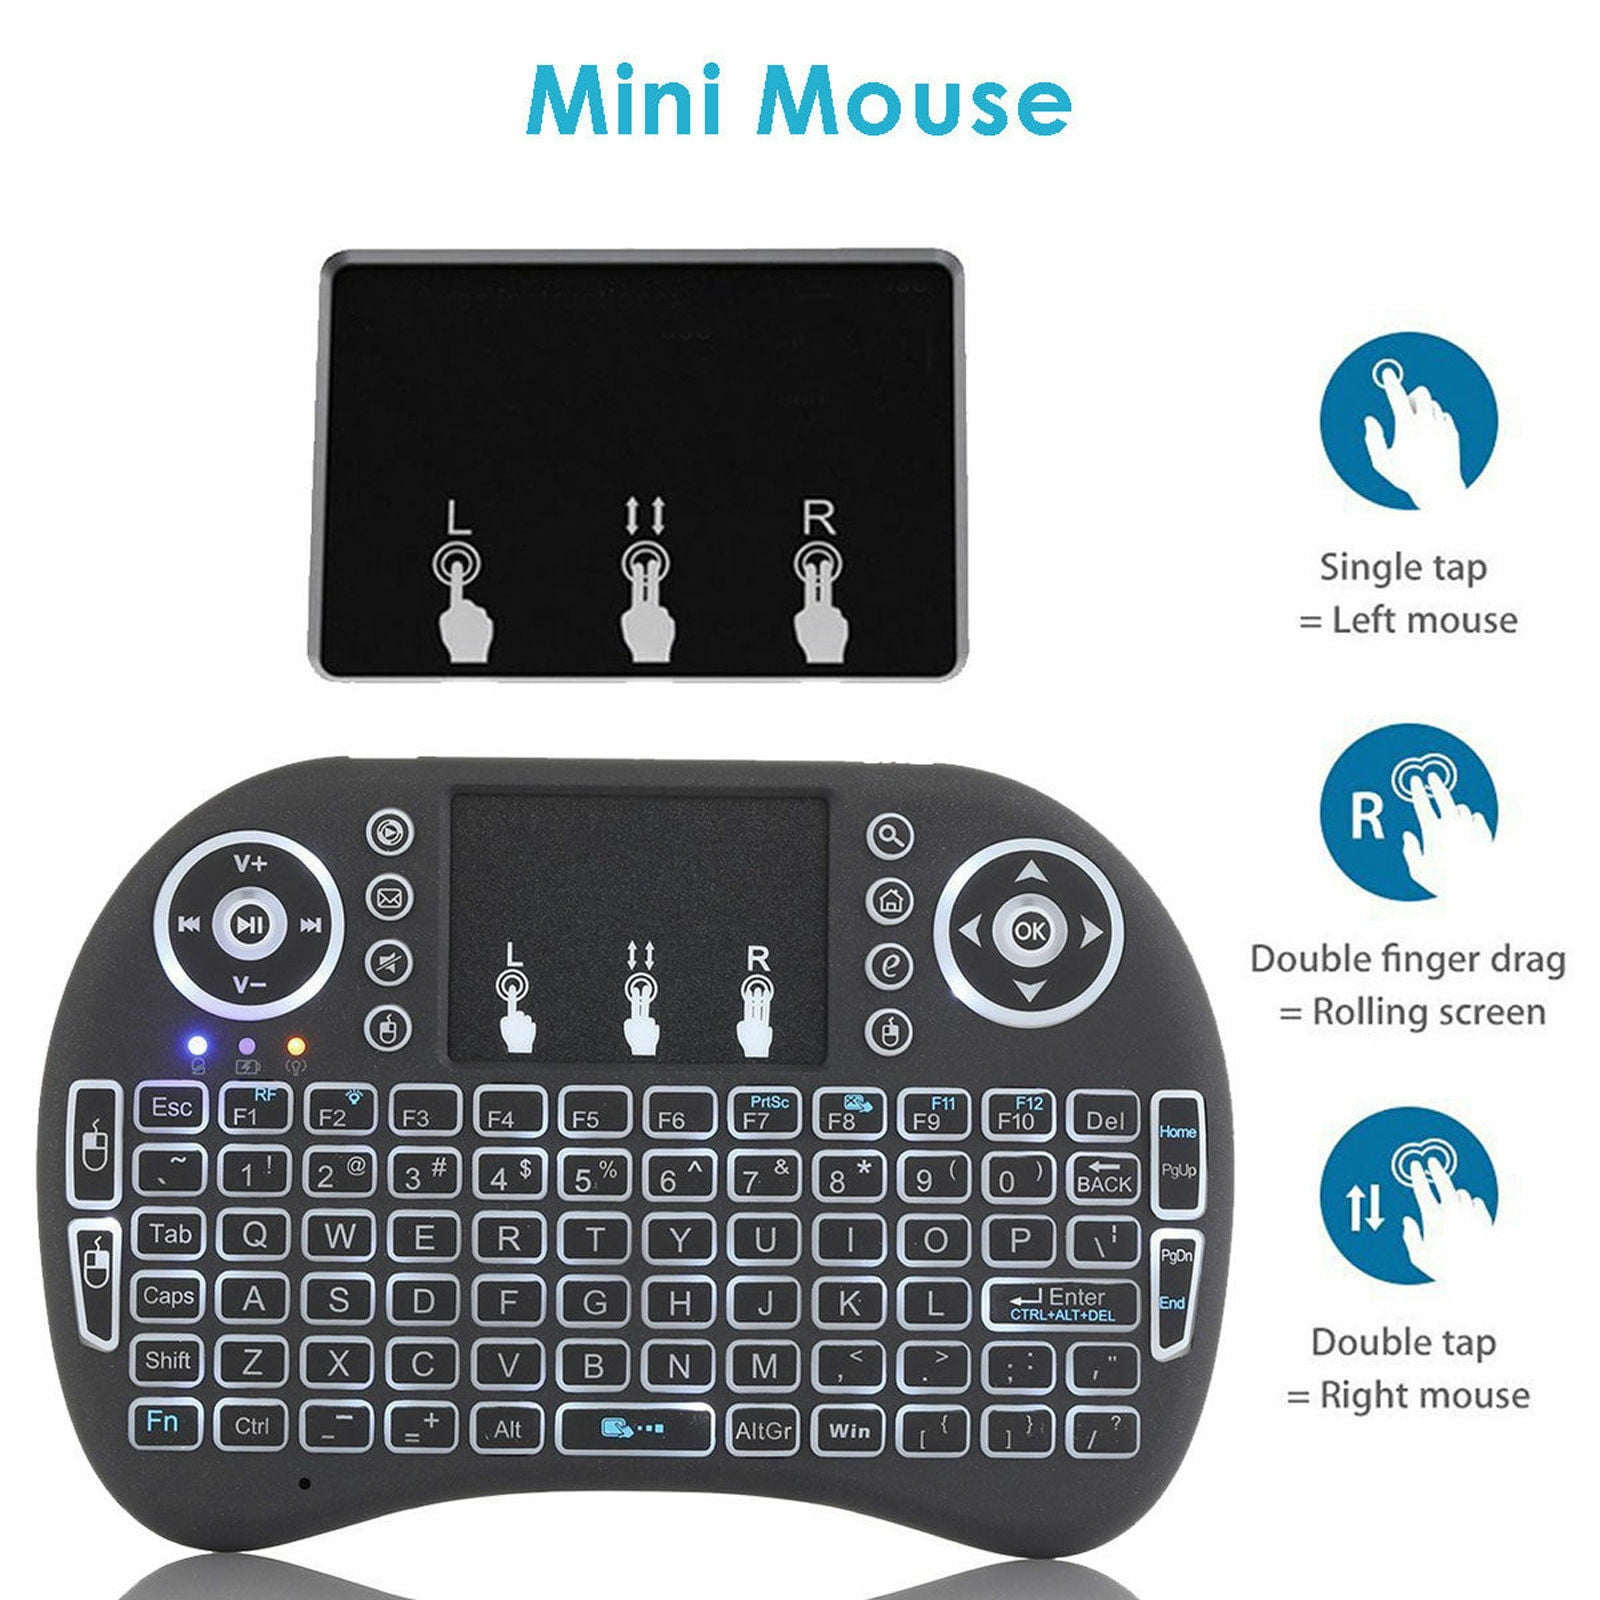 Black Mini Wireless Keyboard/Air Remote Control/Mouse/Touchpad with Colorful Backlit Best for Android TV Box 2.4GHz Connection IPTV Raspberry pi 3,Pad and More Devices. HTPC PC 